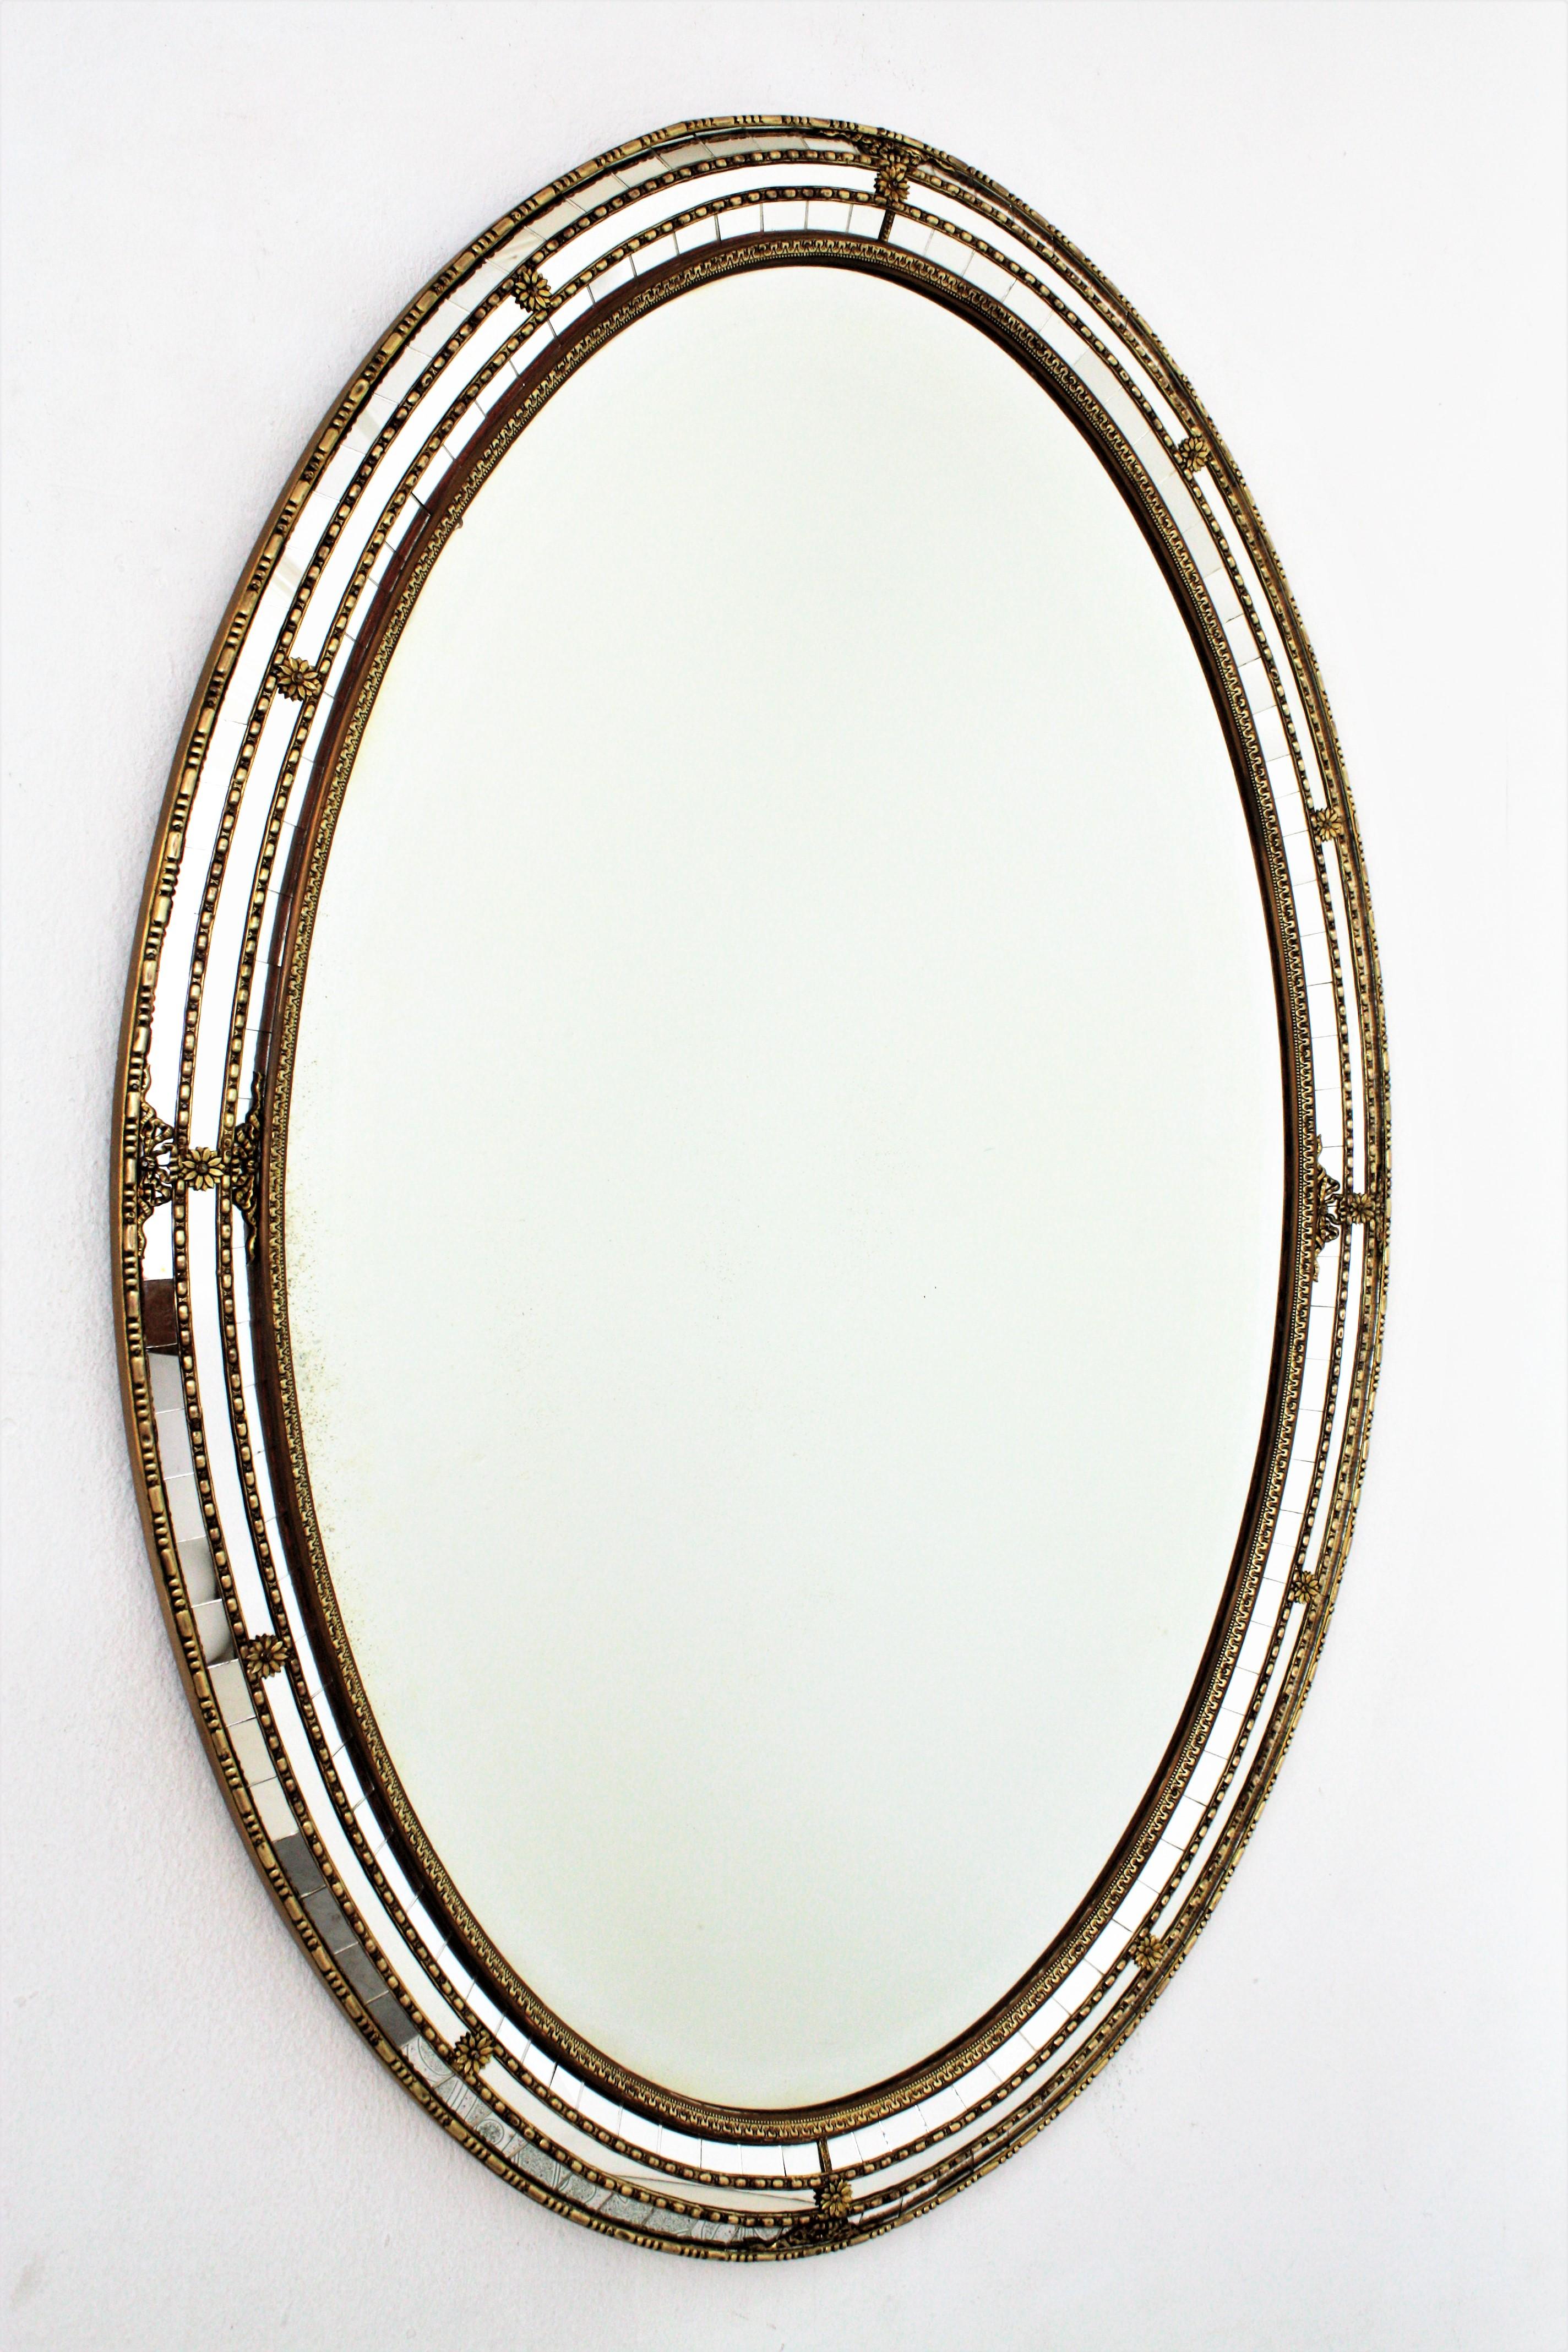 Venetian style Regency modern oval wall mirror with gilt metal accents, Spain, 1950s
This oval mirror is full of beautiful details: It has a beveled central mirror surrounded by a triple mirror mosaic frame cased into a gilt wood structure. The